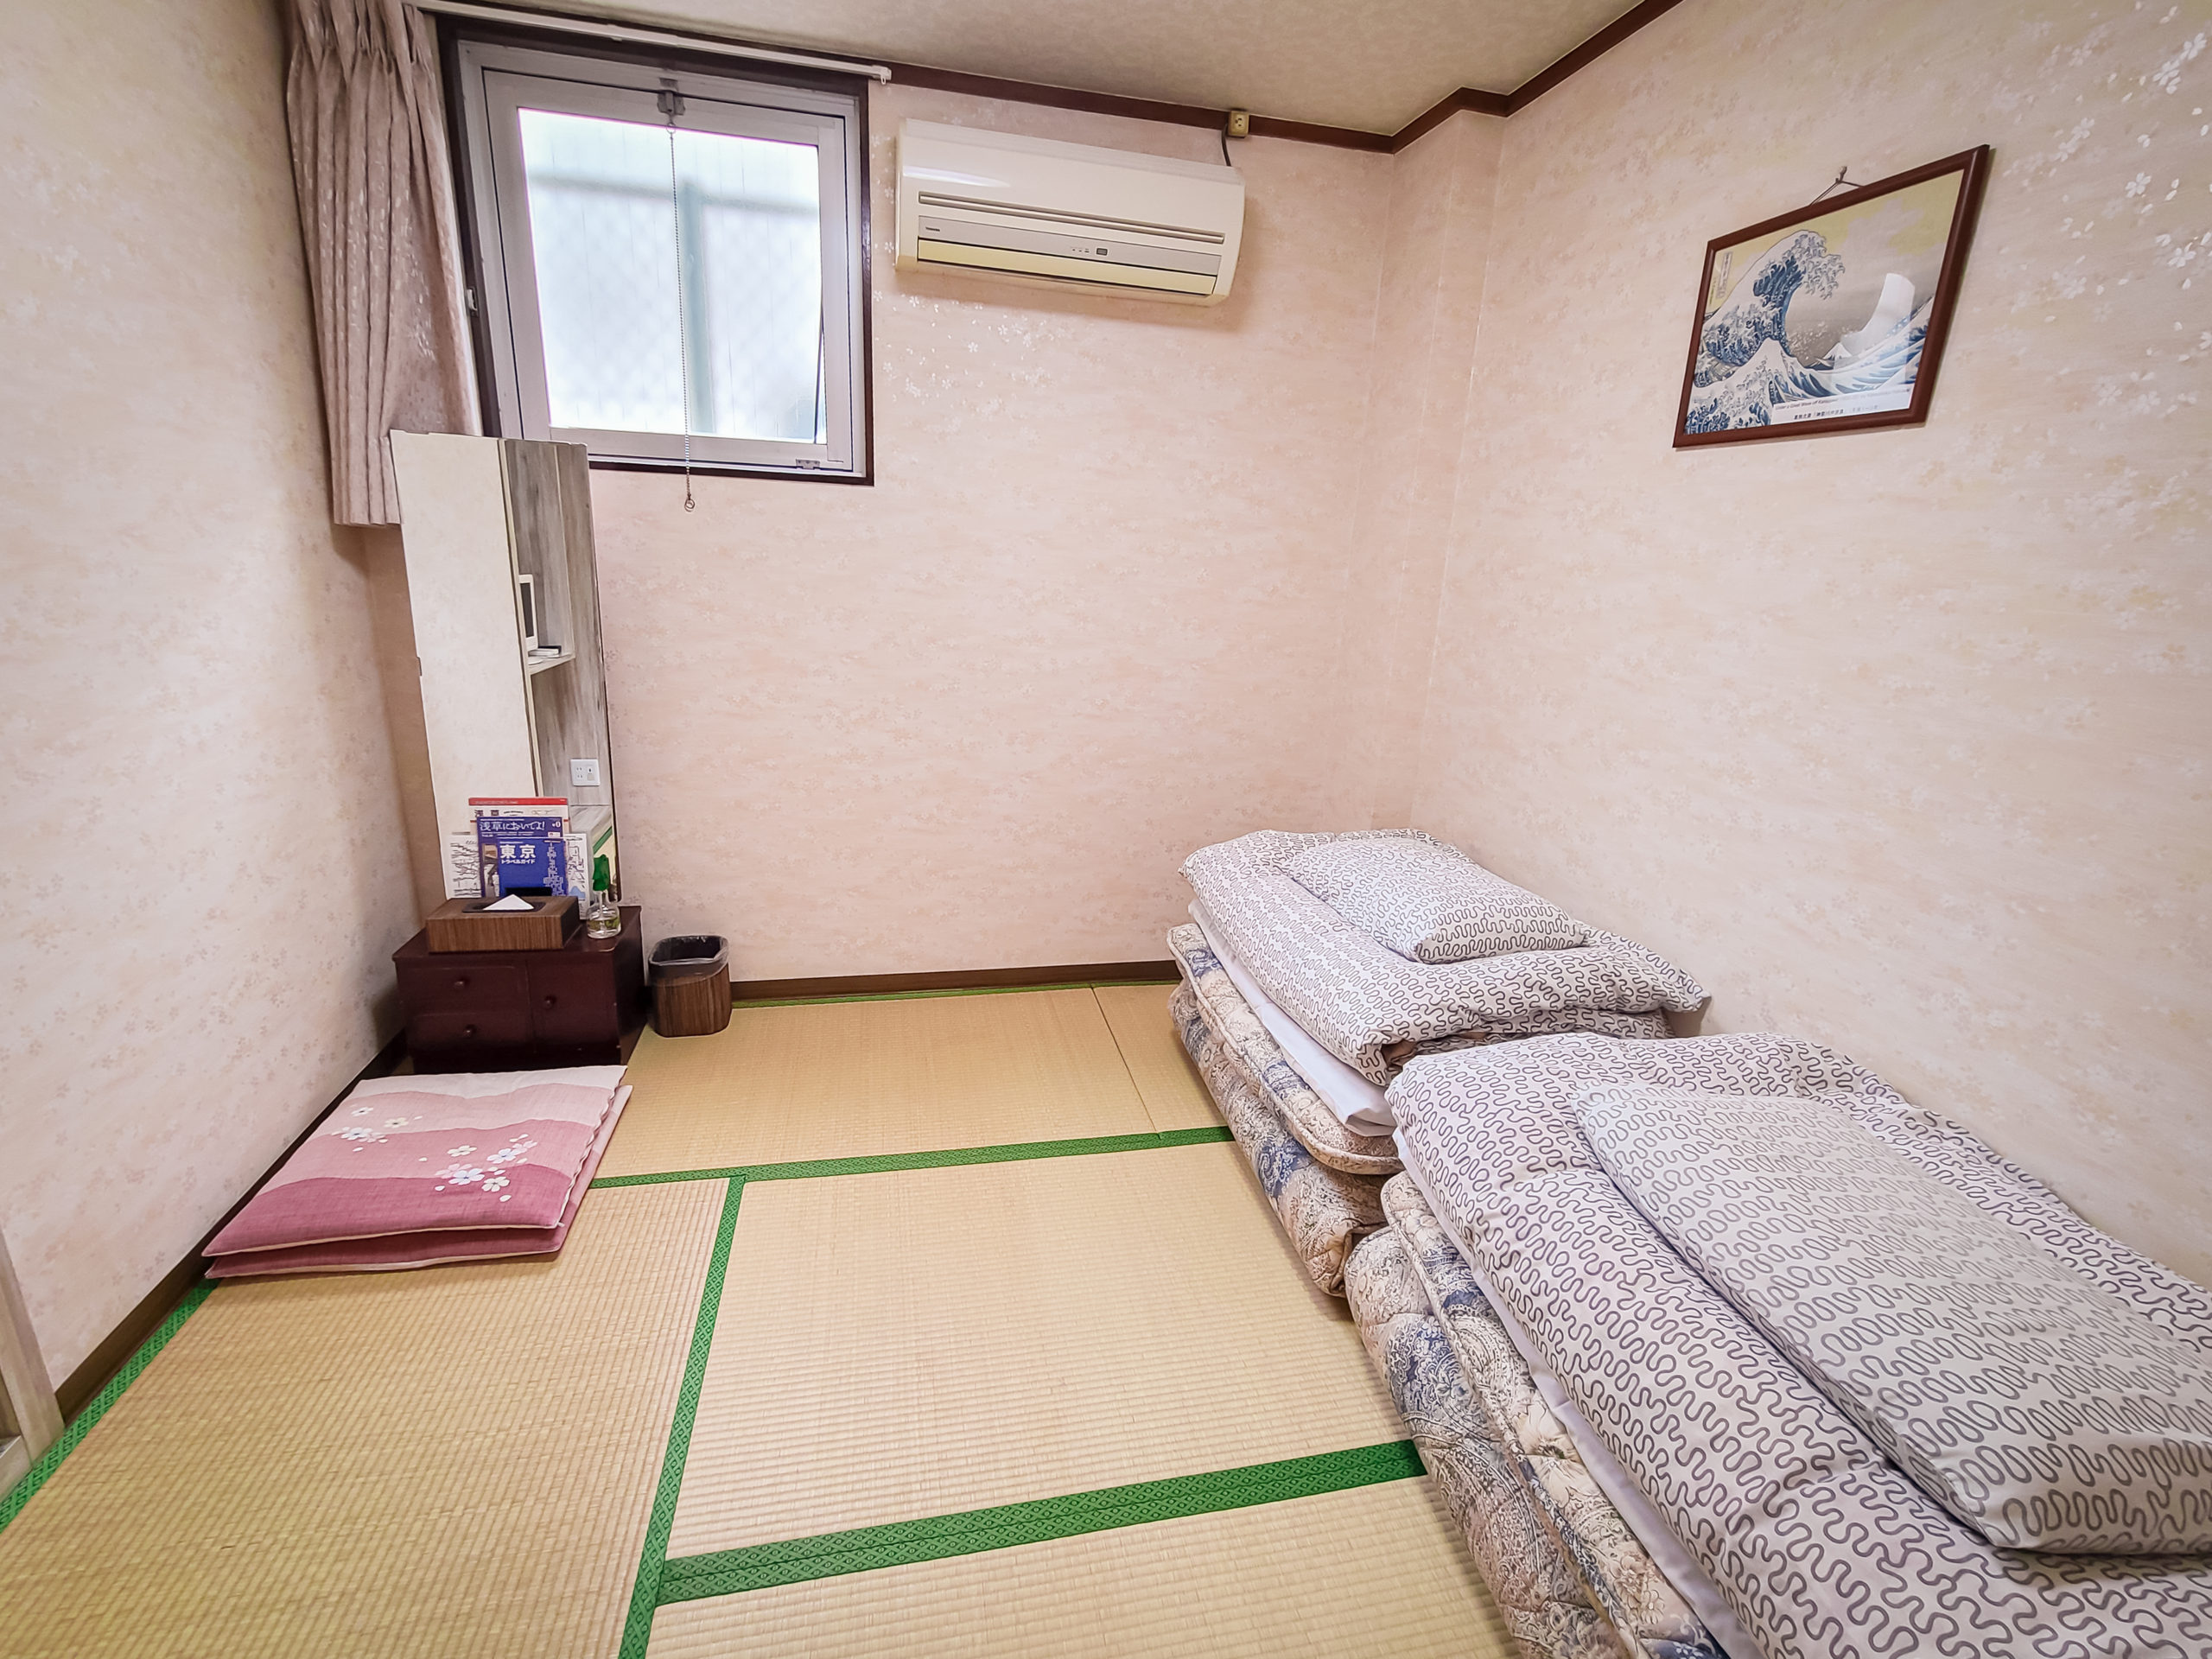 Each room has the common ryokan set—a yukata for sleeping and a container with a tea set